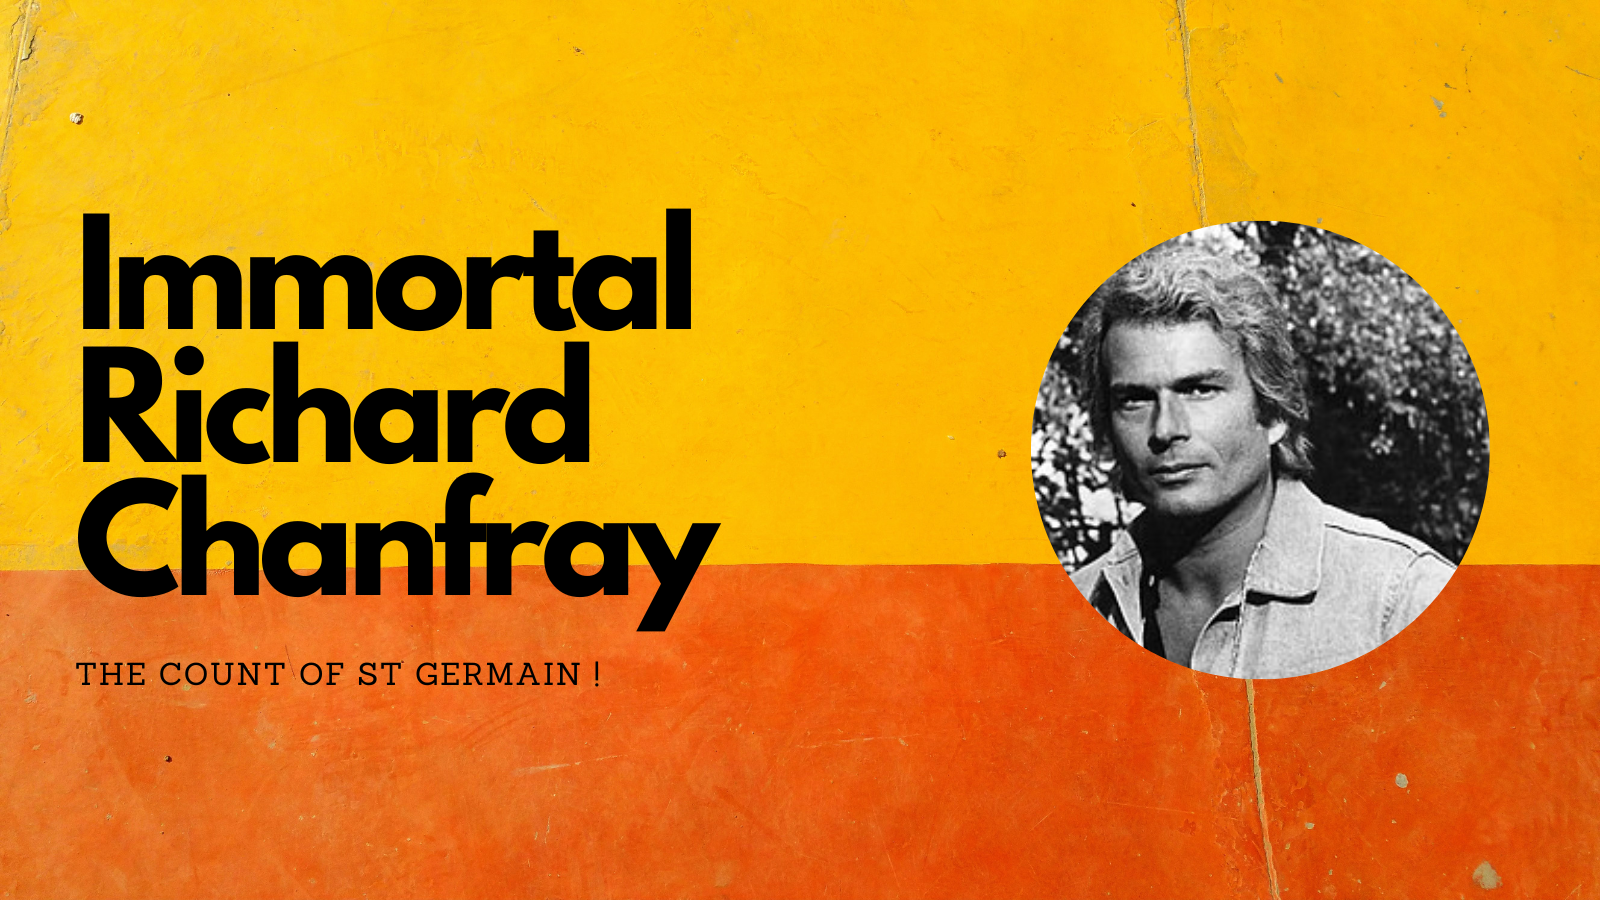 Everything you wanted to know about Richard Chanfray, the Count of St. Germain